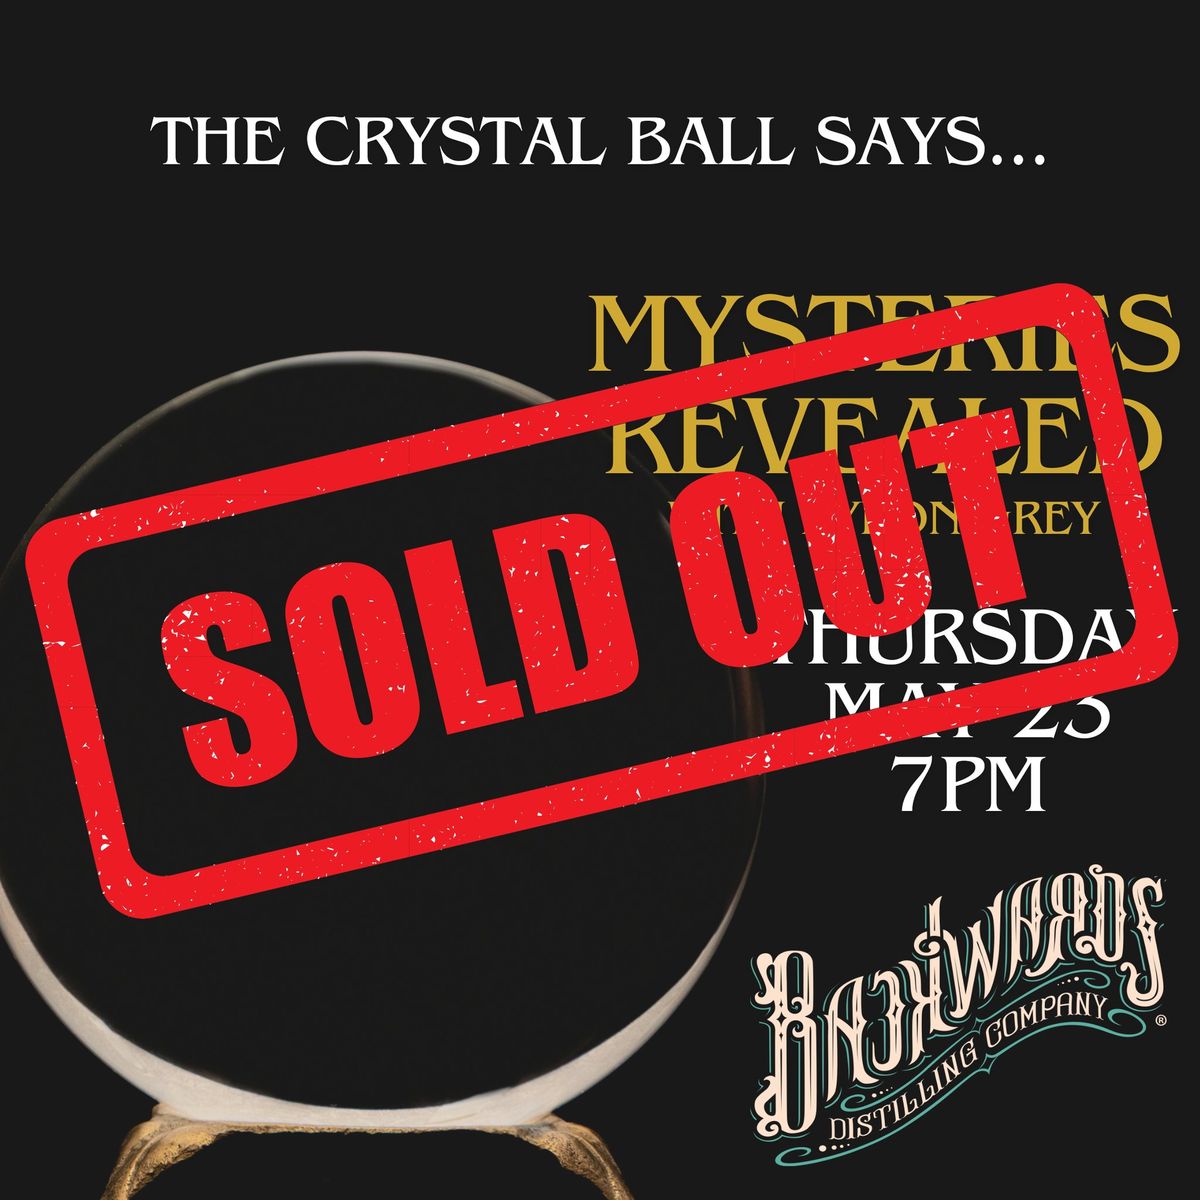 SOLD OUT- Byron Grey's "Mysteries Revealed" @ Backwards Distilling